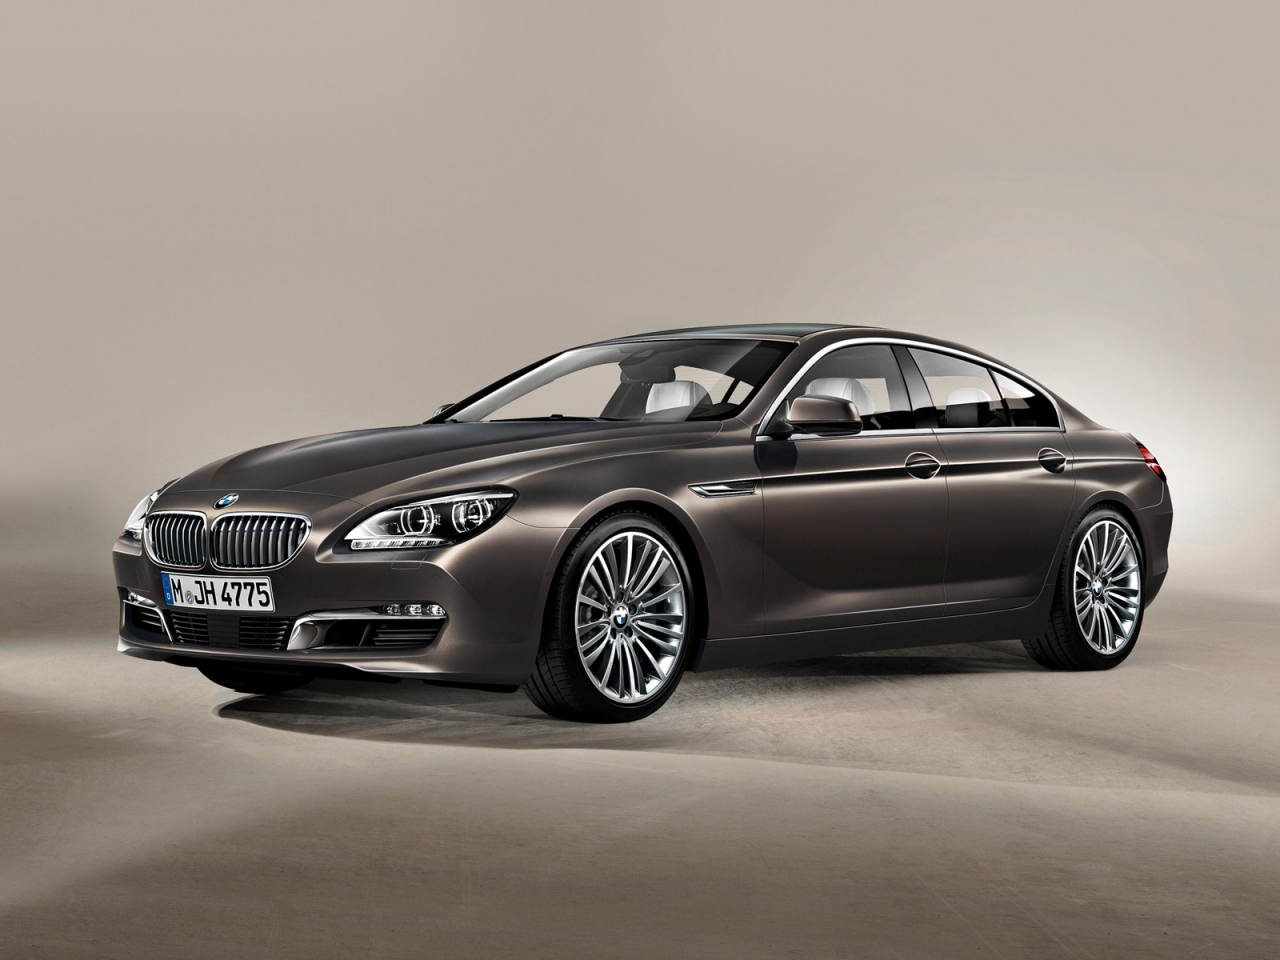 2013 BMW 6 Series Gran Coupe Studio for 1280 x 960 resolution